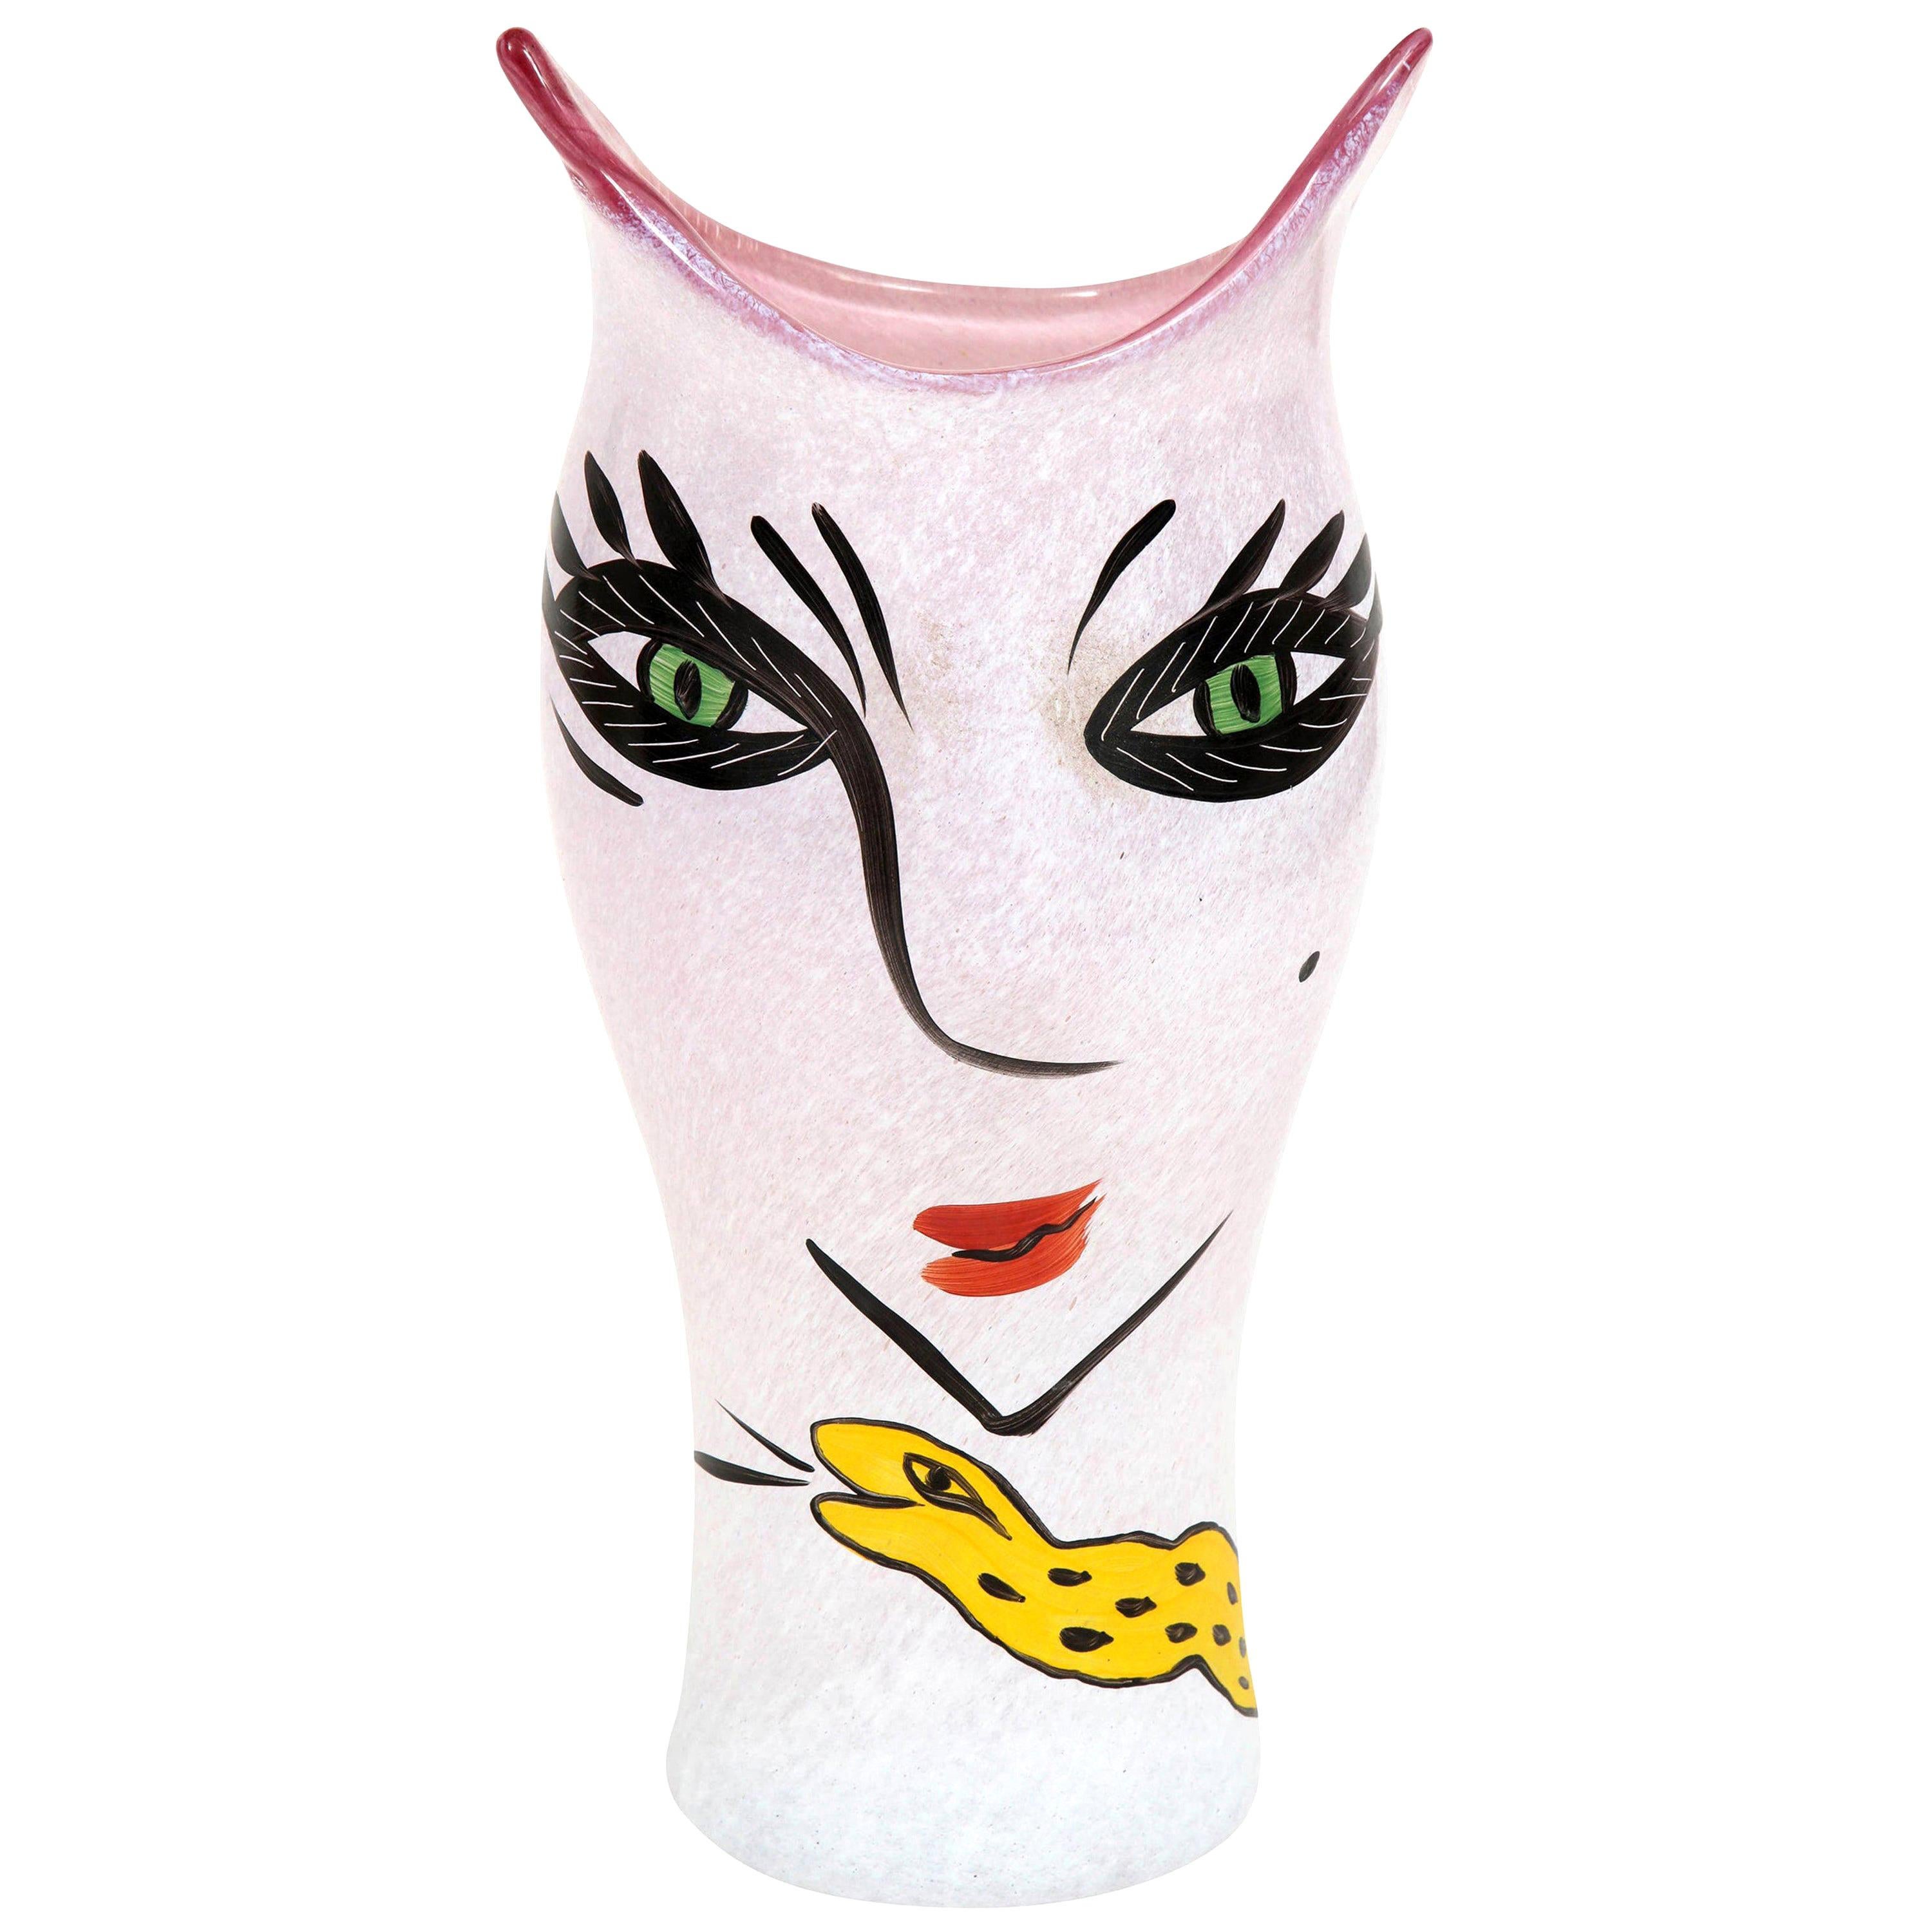 Vase by Kosta Boda, Glass, Sweden, Lady Face, Pink, Black and Yellow